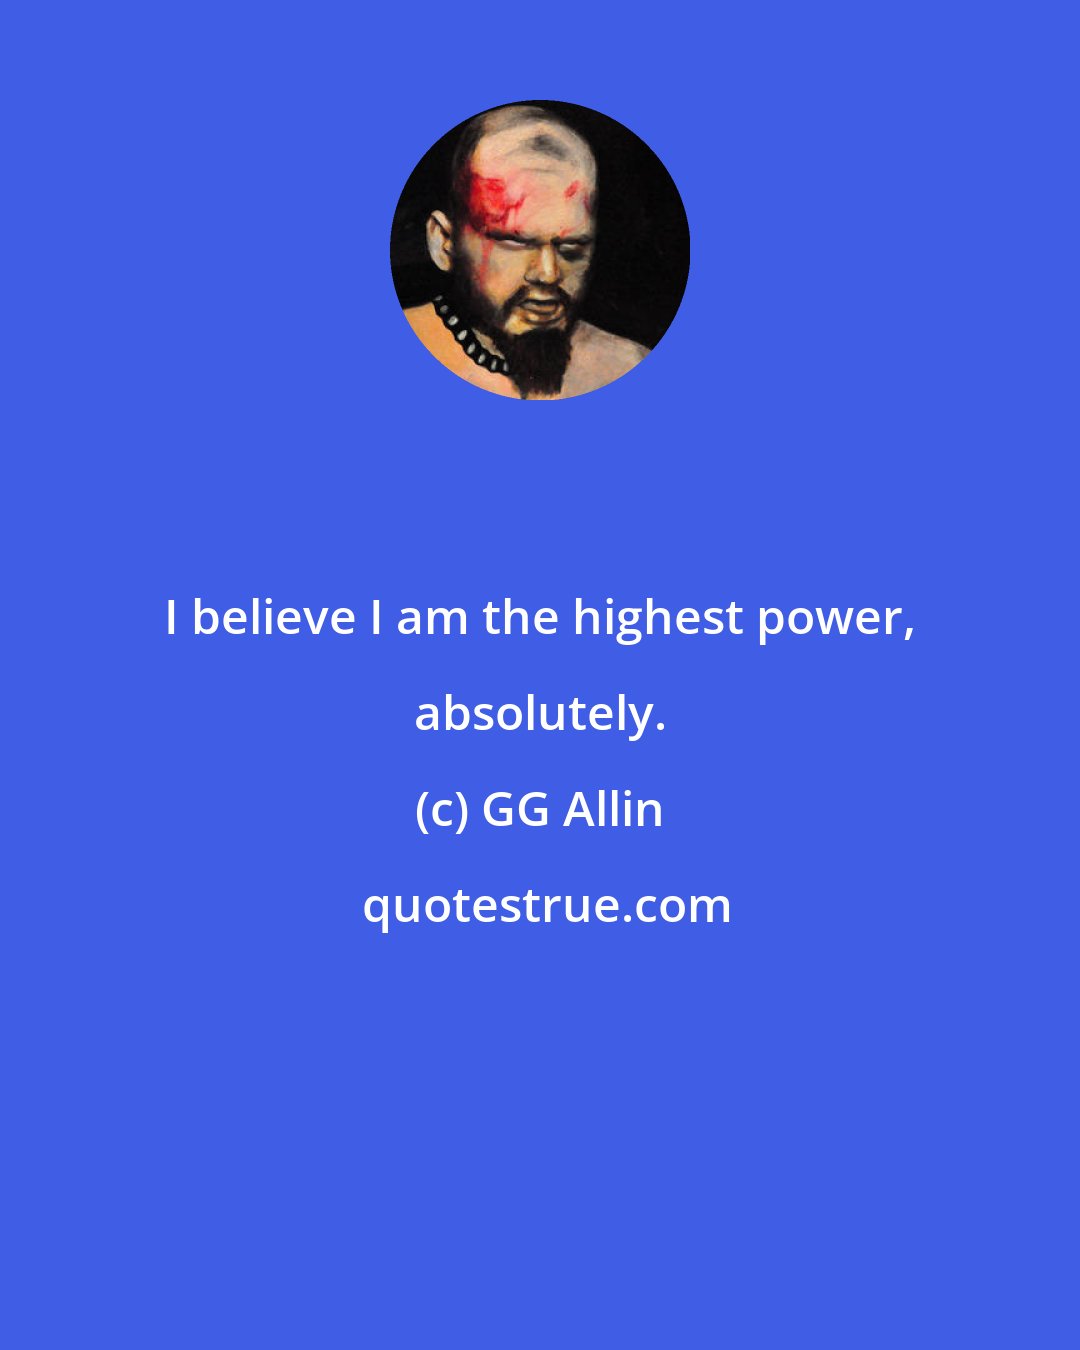 GG Allin: I believe I am the highest power, absolutely.